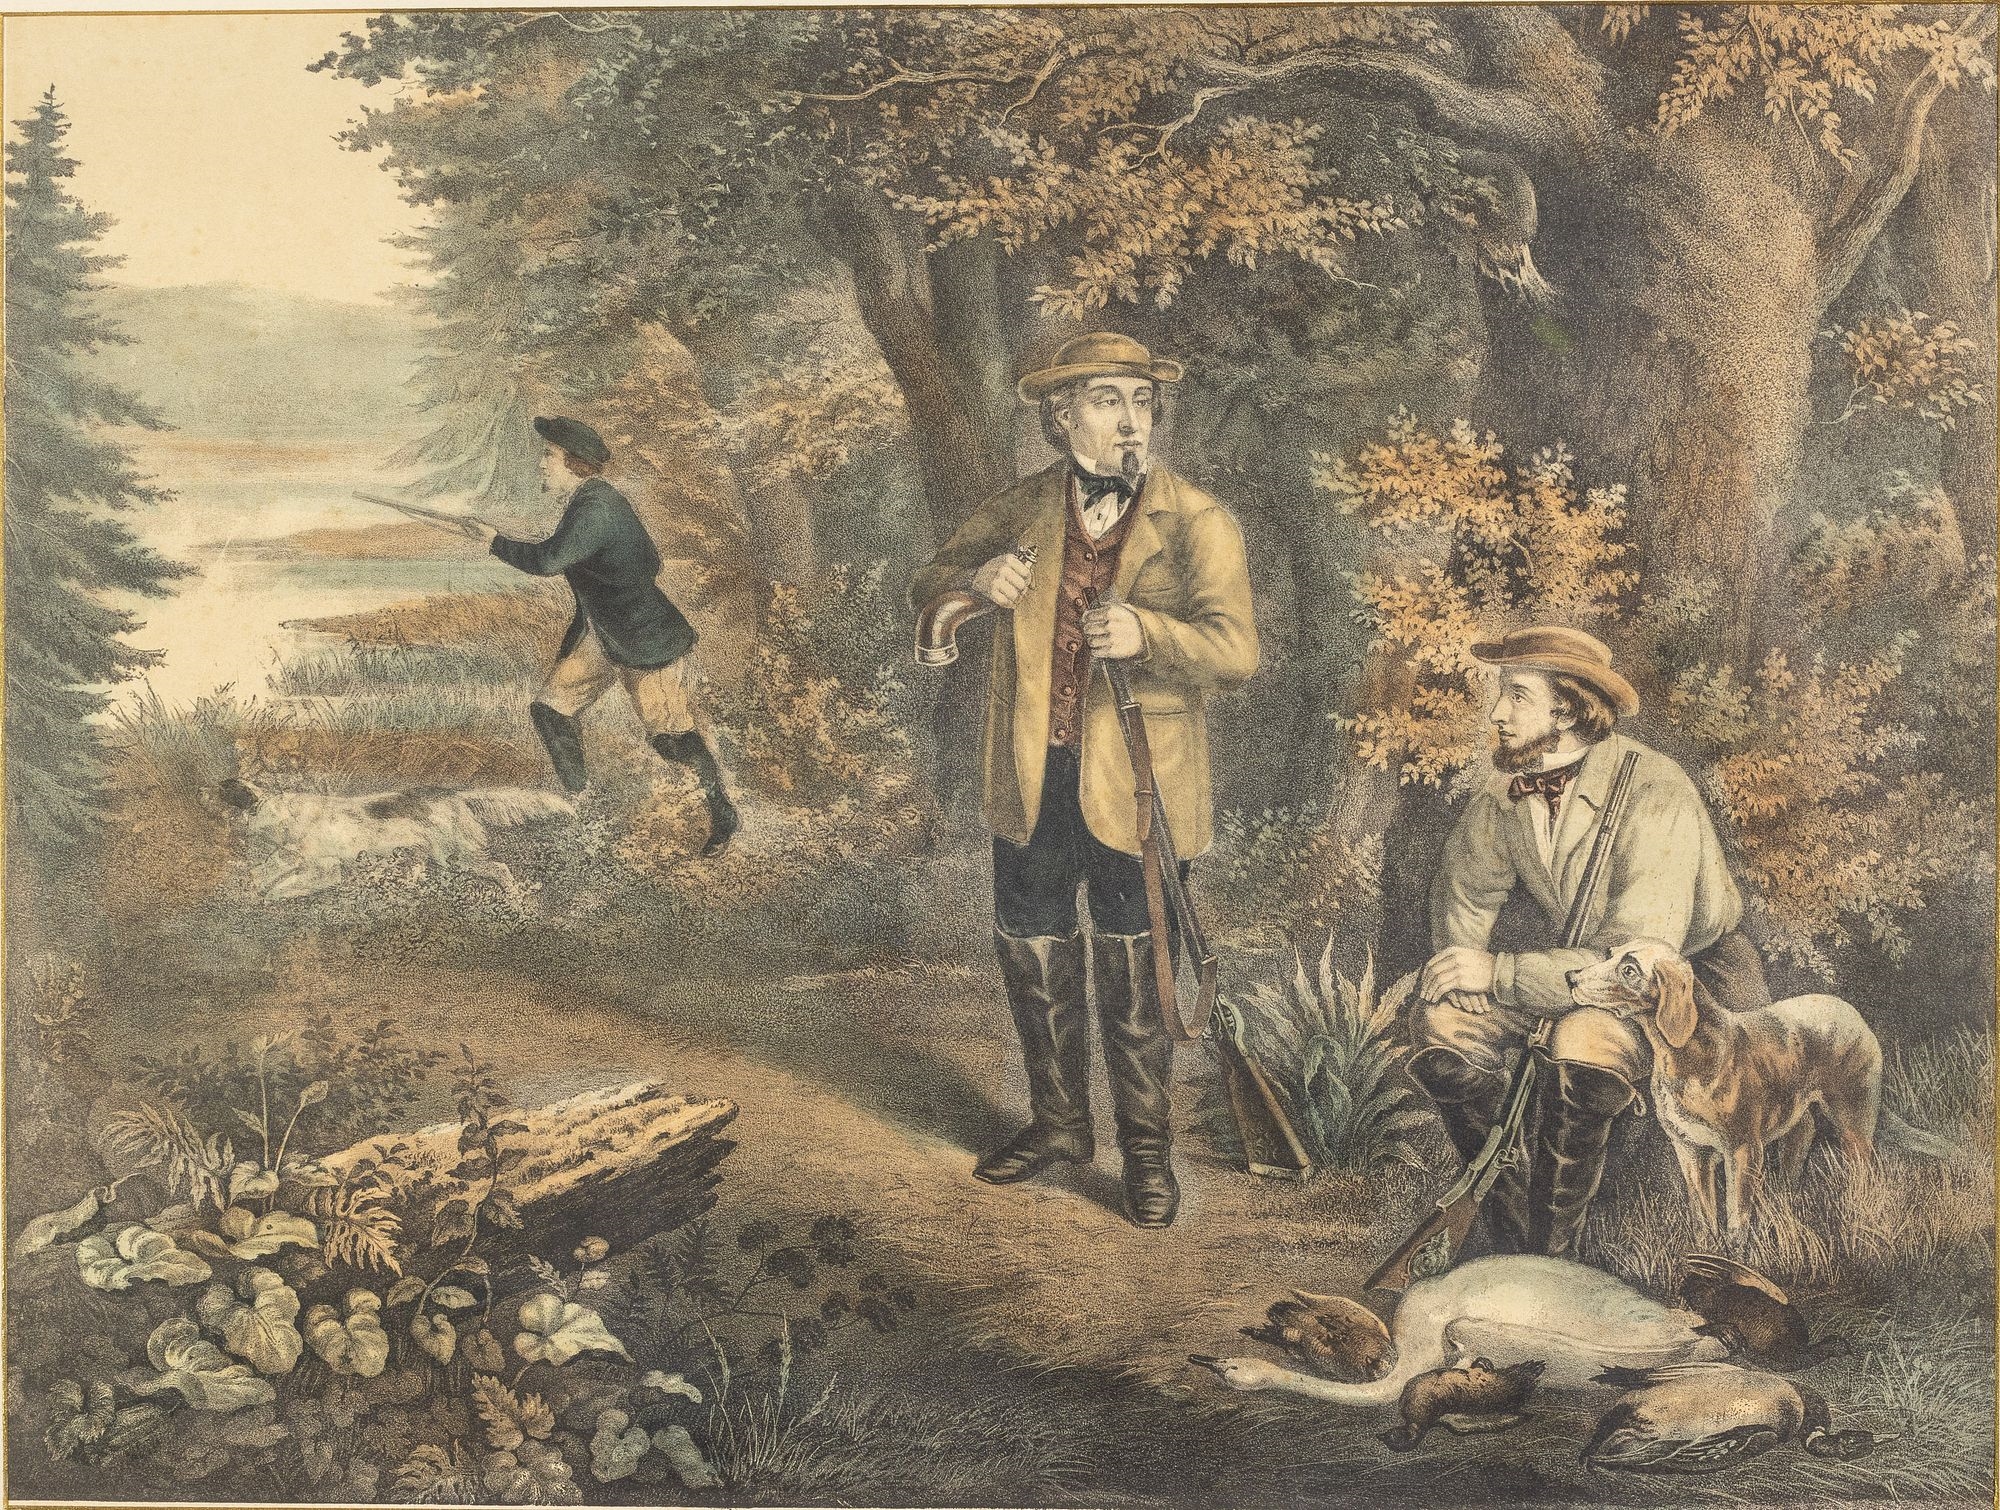 Currier & Ives, American Hunting Scene (Circa 1870)